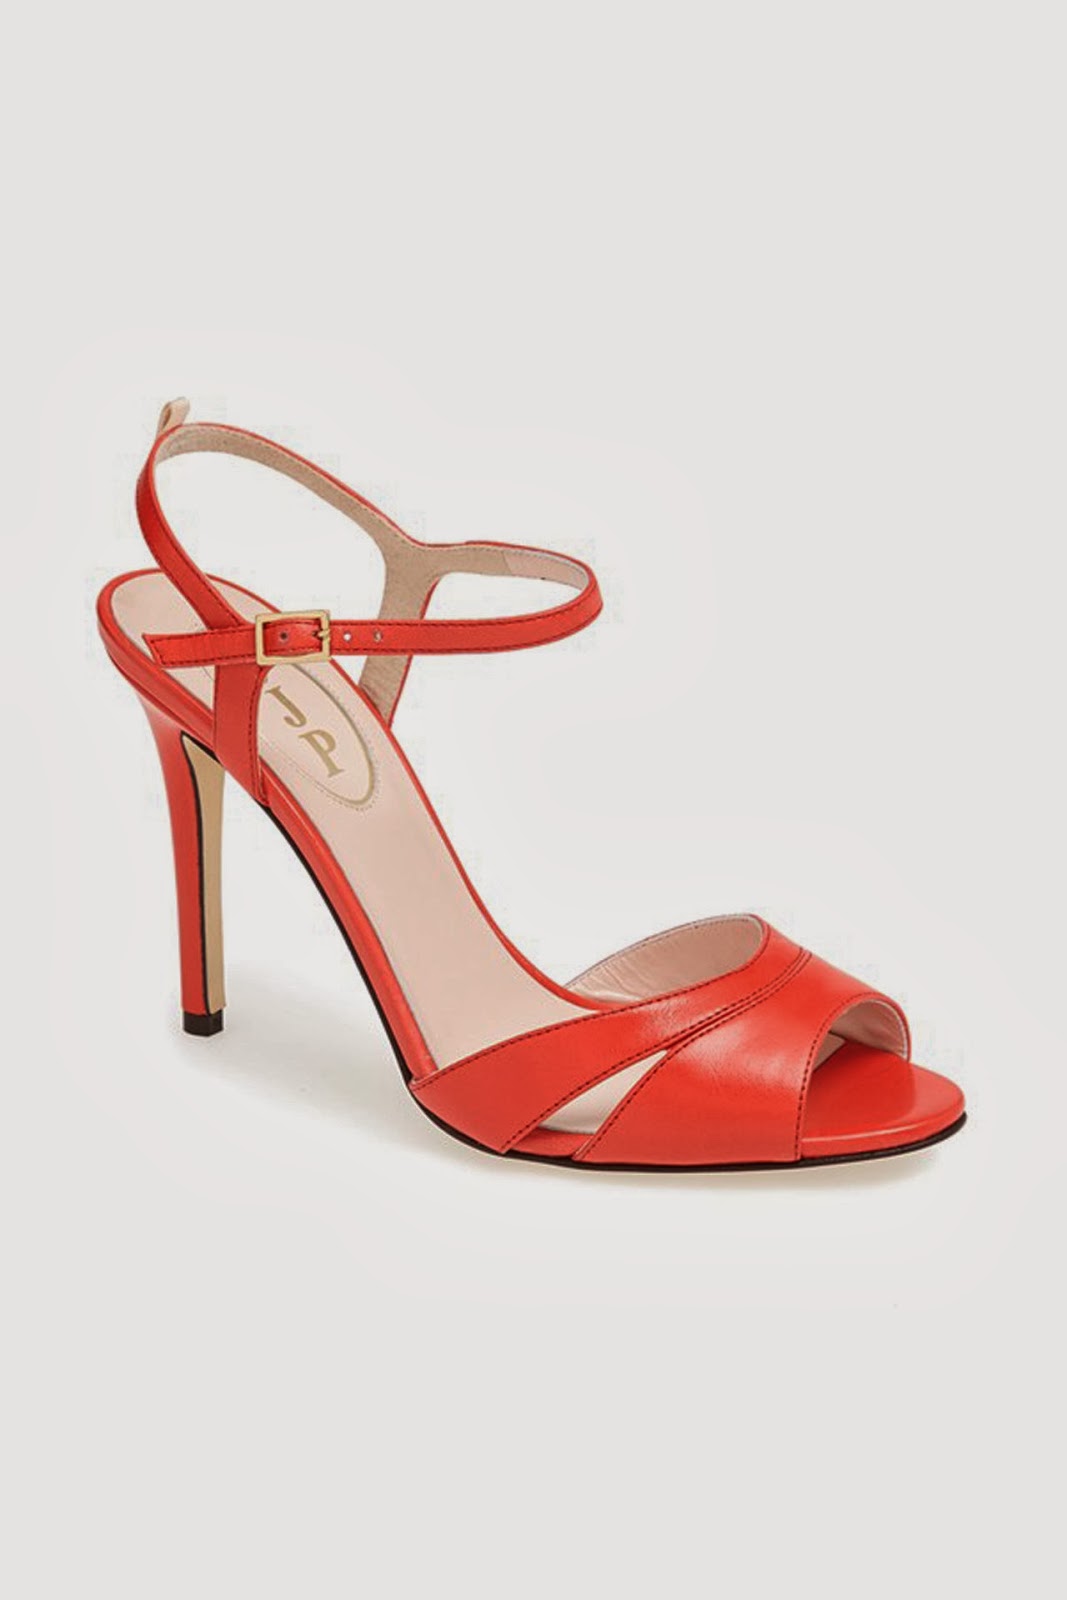 NYC Recessionista: NOW AVAILABLE - SJP Shoes by Sarah Jessica Parker at ...